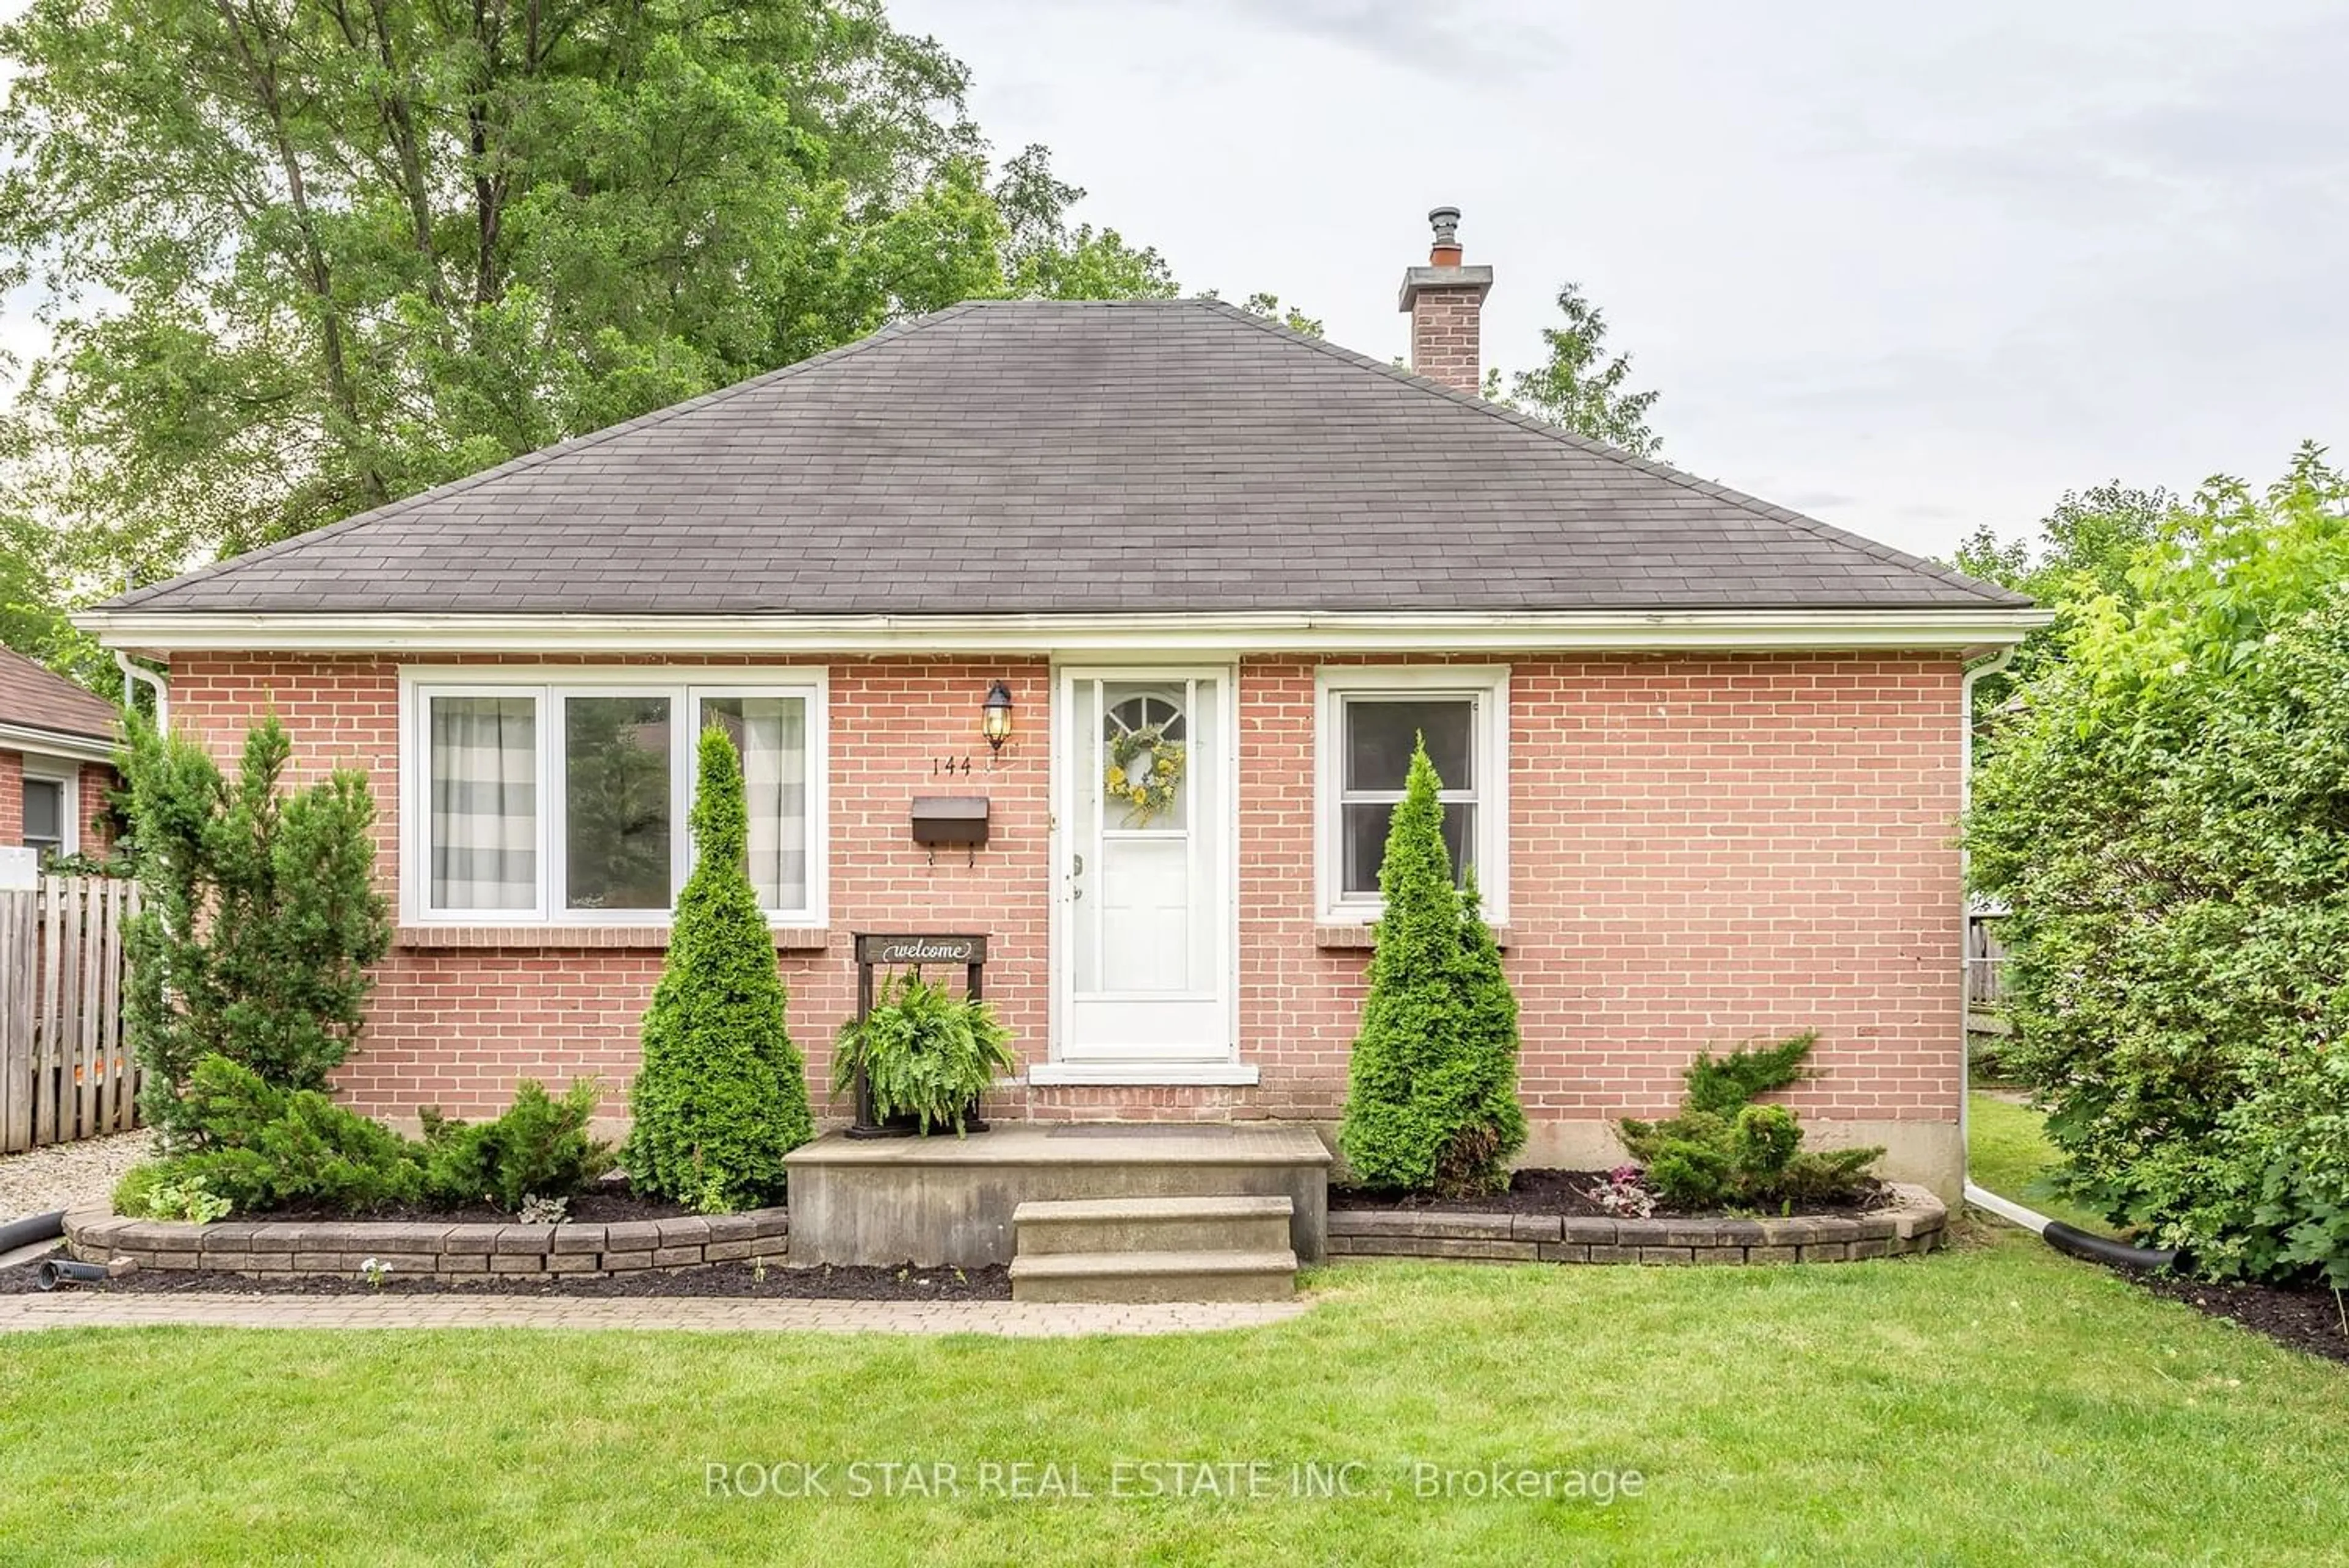 Home with brick exterior material for 144 Empress Ave, London Ontario N6H 1N5